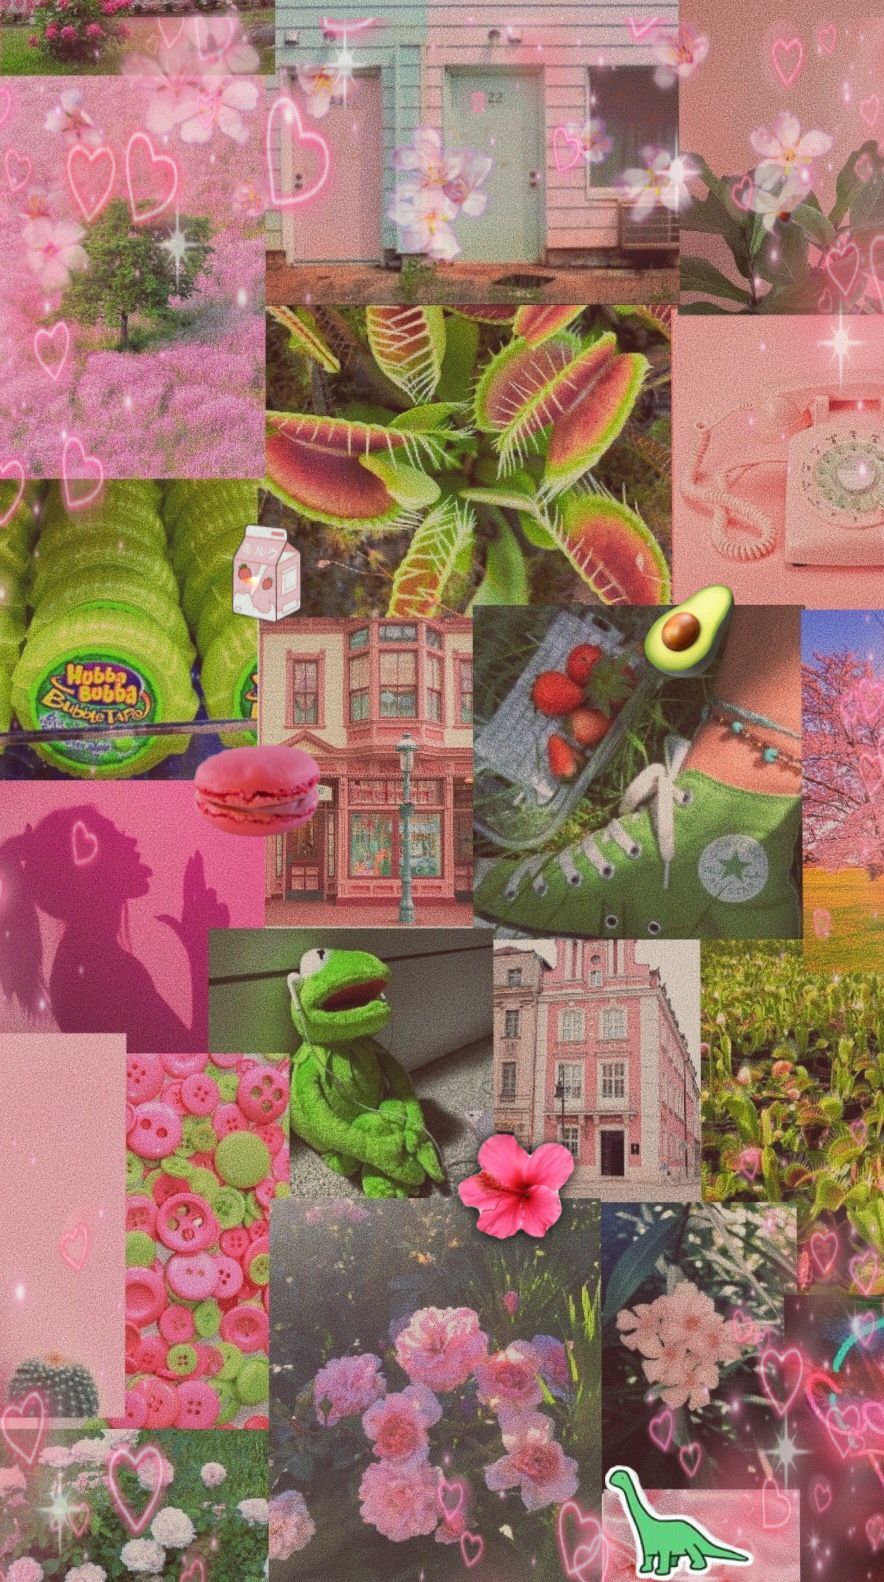 A collage of pink and green aesthetic images including flowers, plants, a dinosaur, and a house. - Soft green